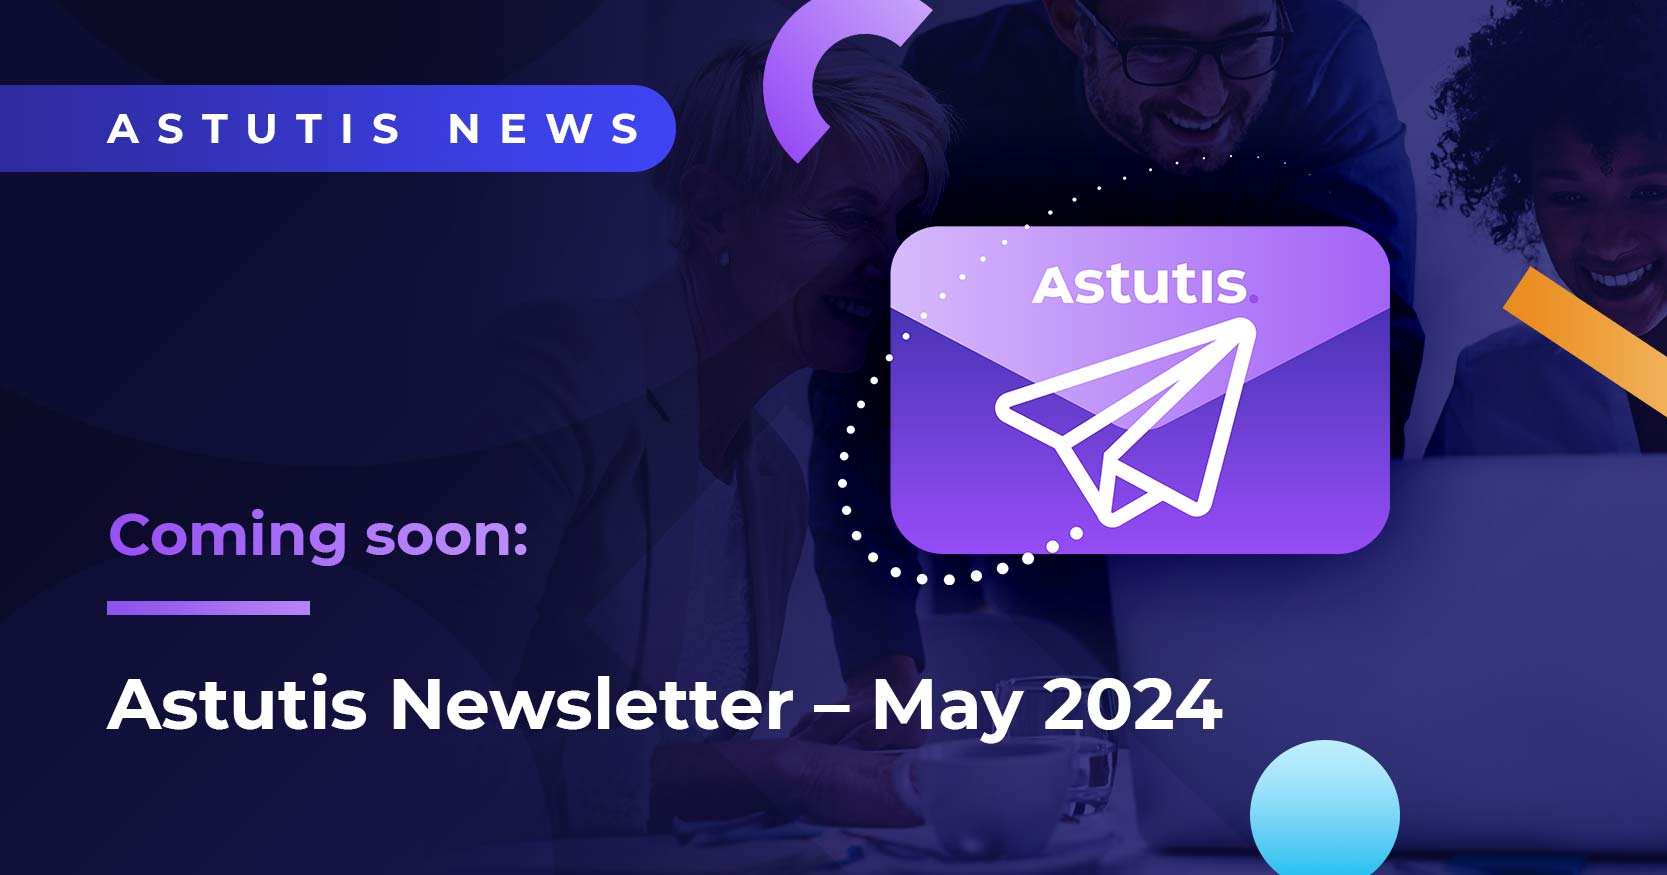 Coming Soon: Asutis Newsletter - May 2024 Image